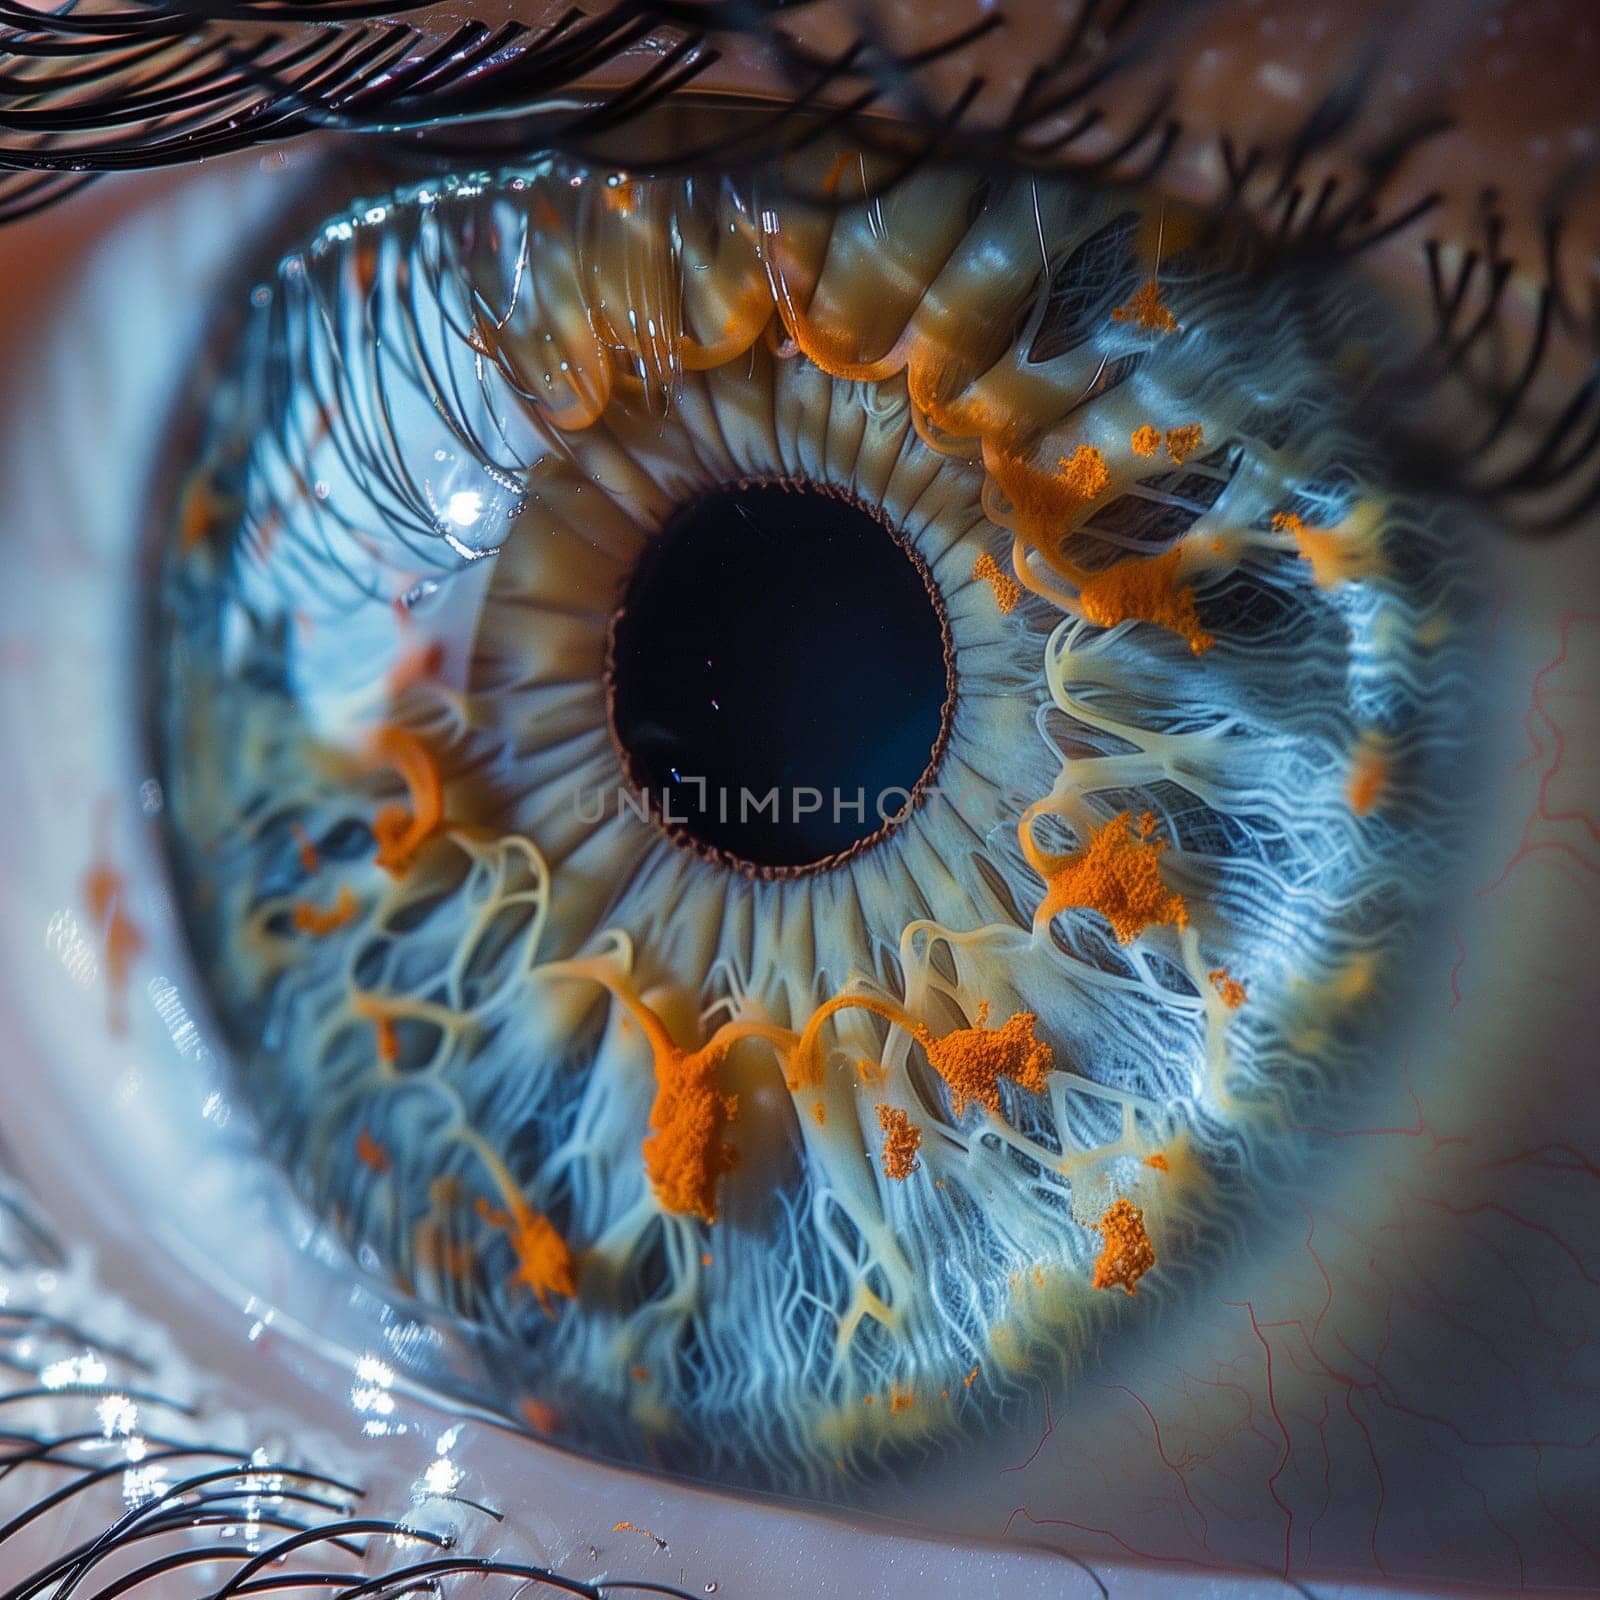 Beautiful close-up photo of the eye. High quality photo